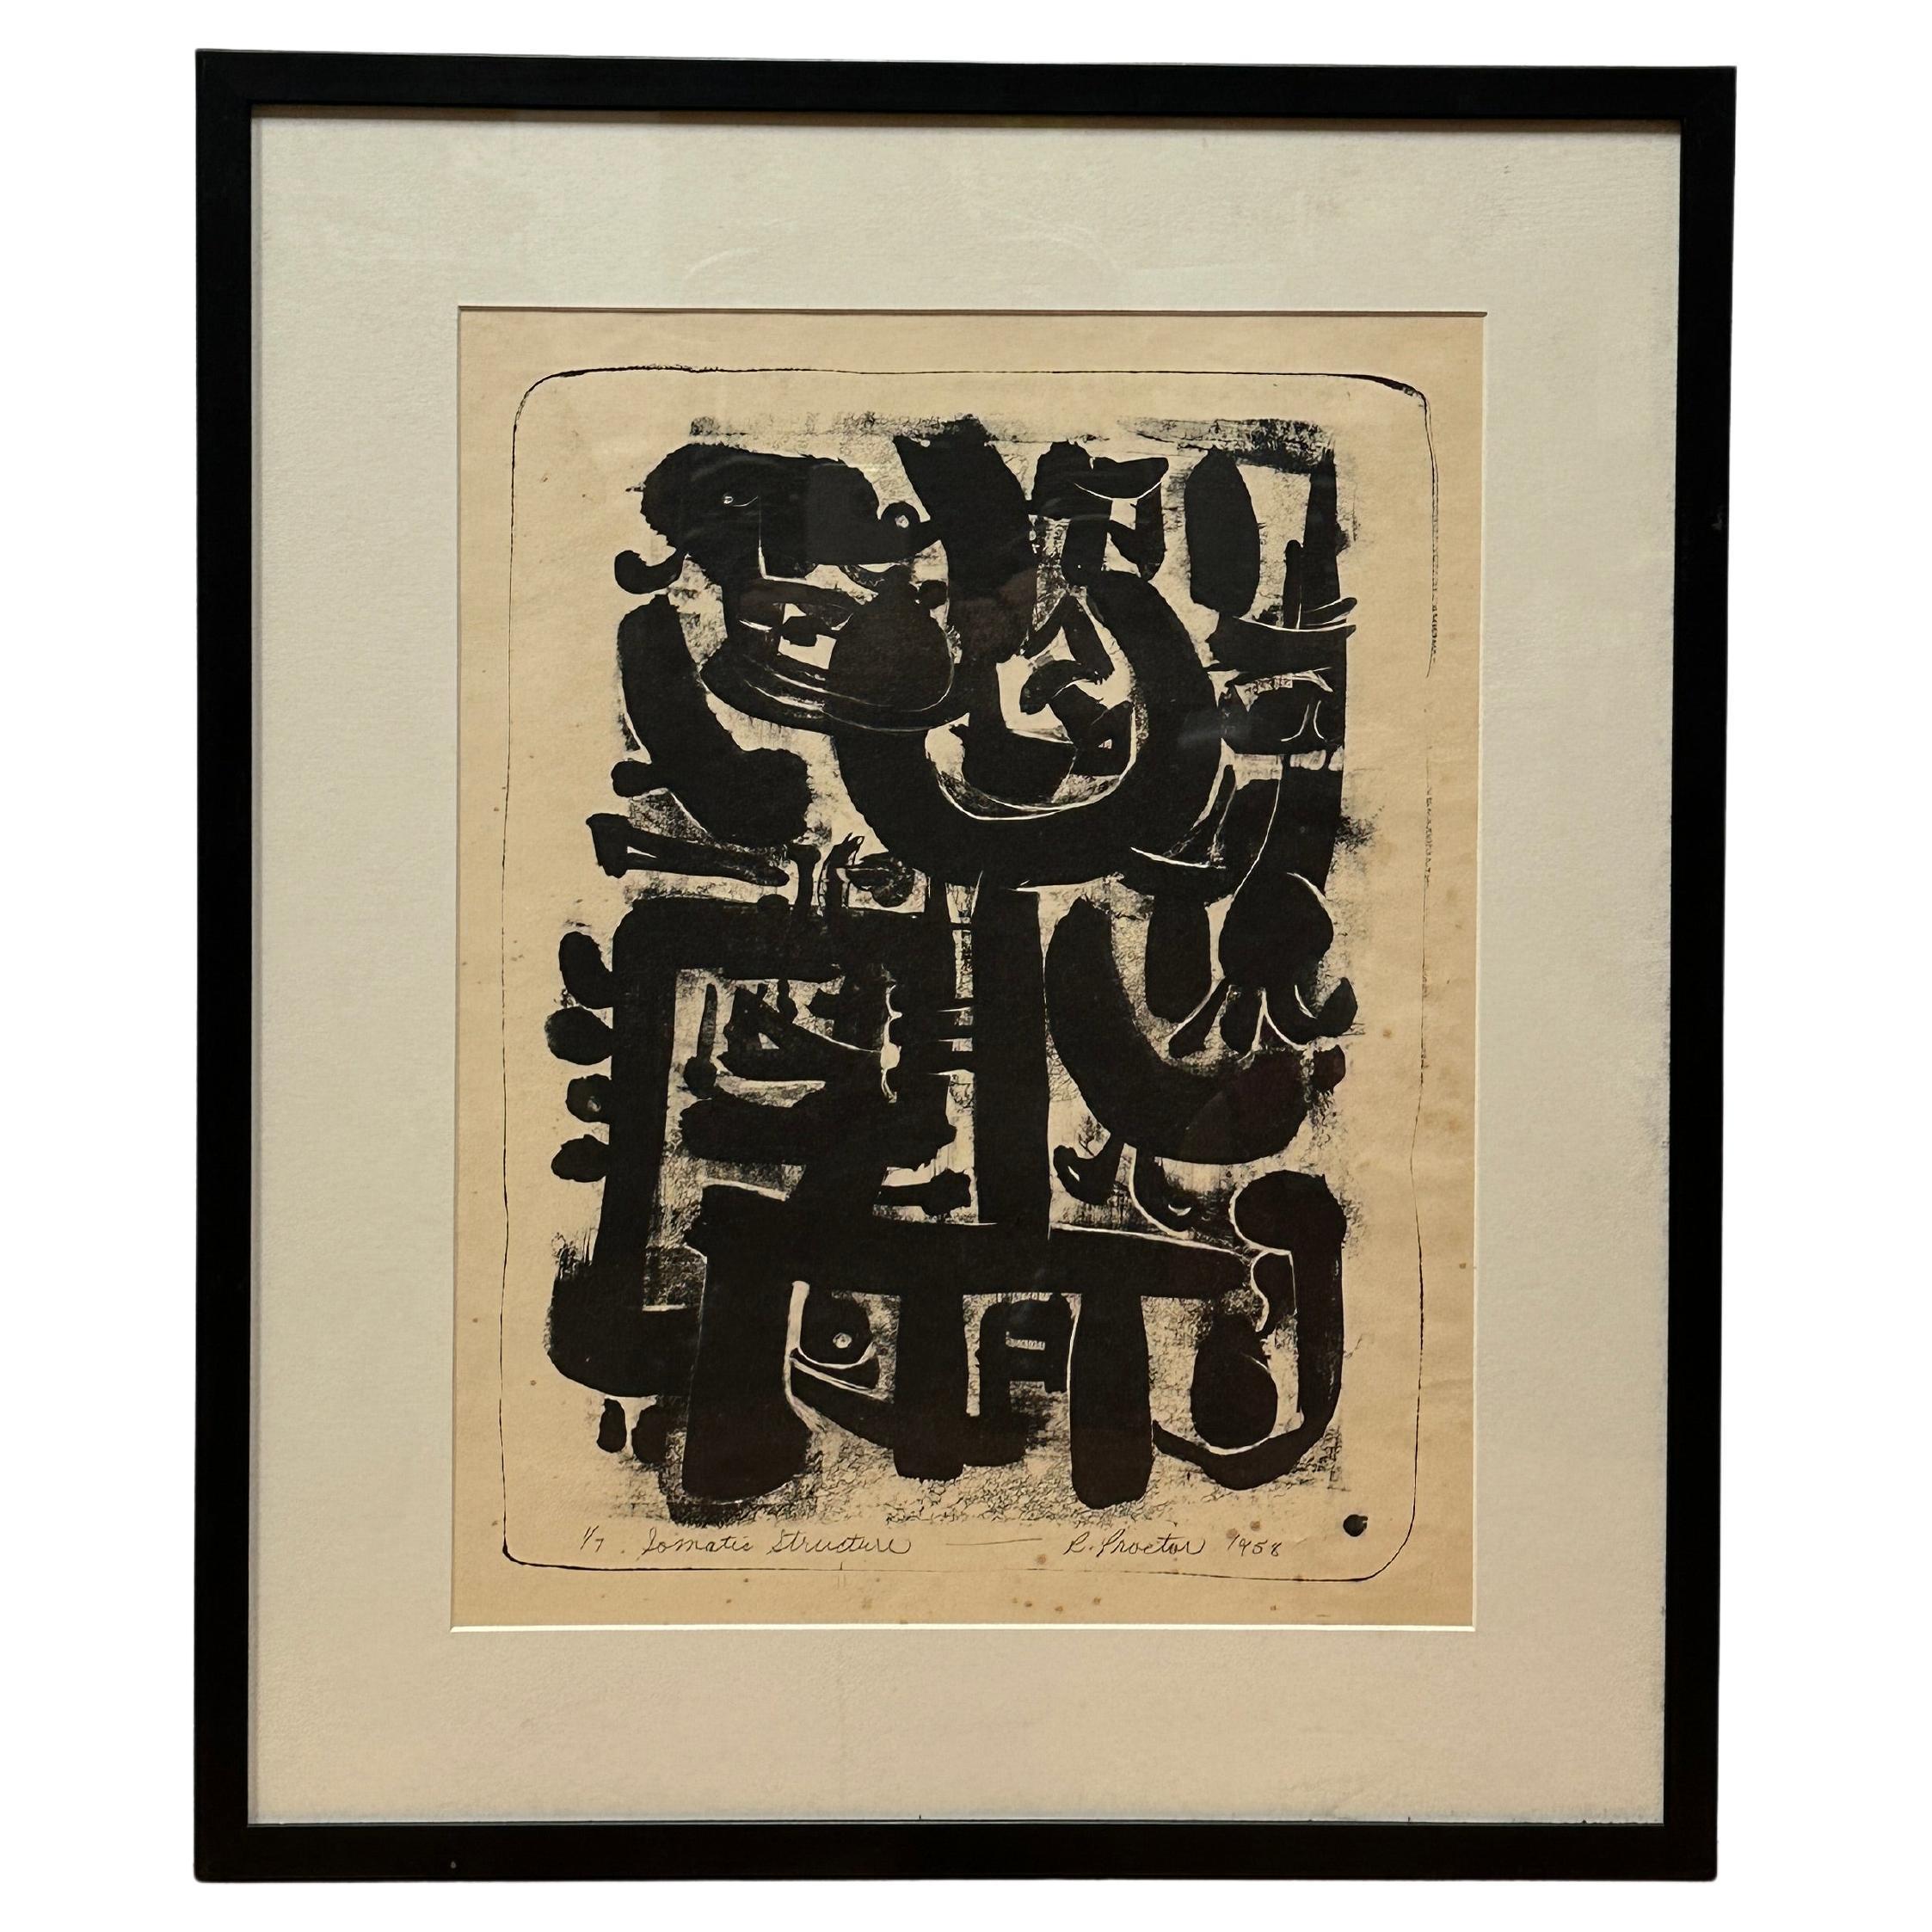 “ Somatic Structure” is a Black and White Abstract Lithography by the artist Richard Proctor. It showcases his early work, which is very different from his later work. He created this lithograph dated 1958 when he was 22 years old. Richard received